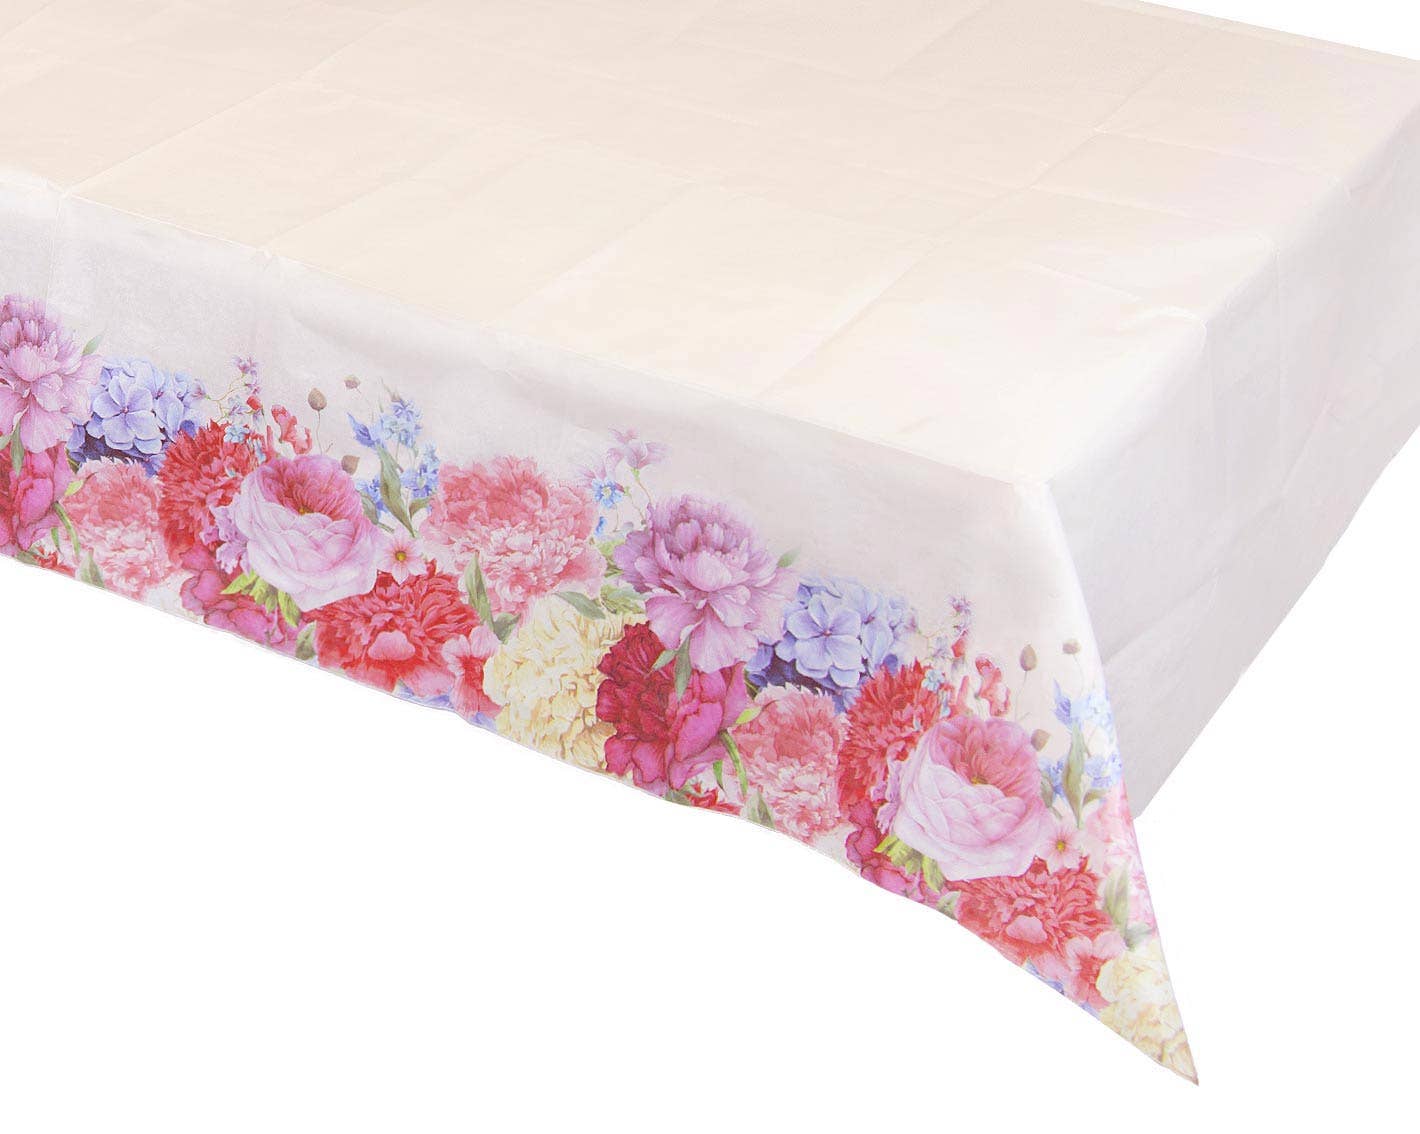 Truly Scrumptious Floral Paper Table Cover